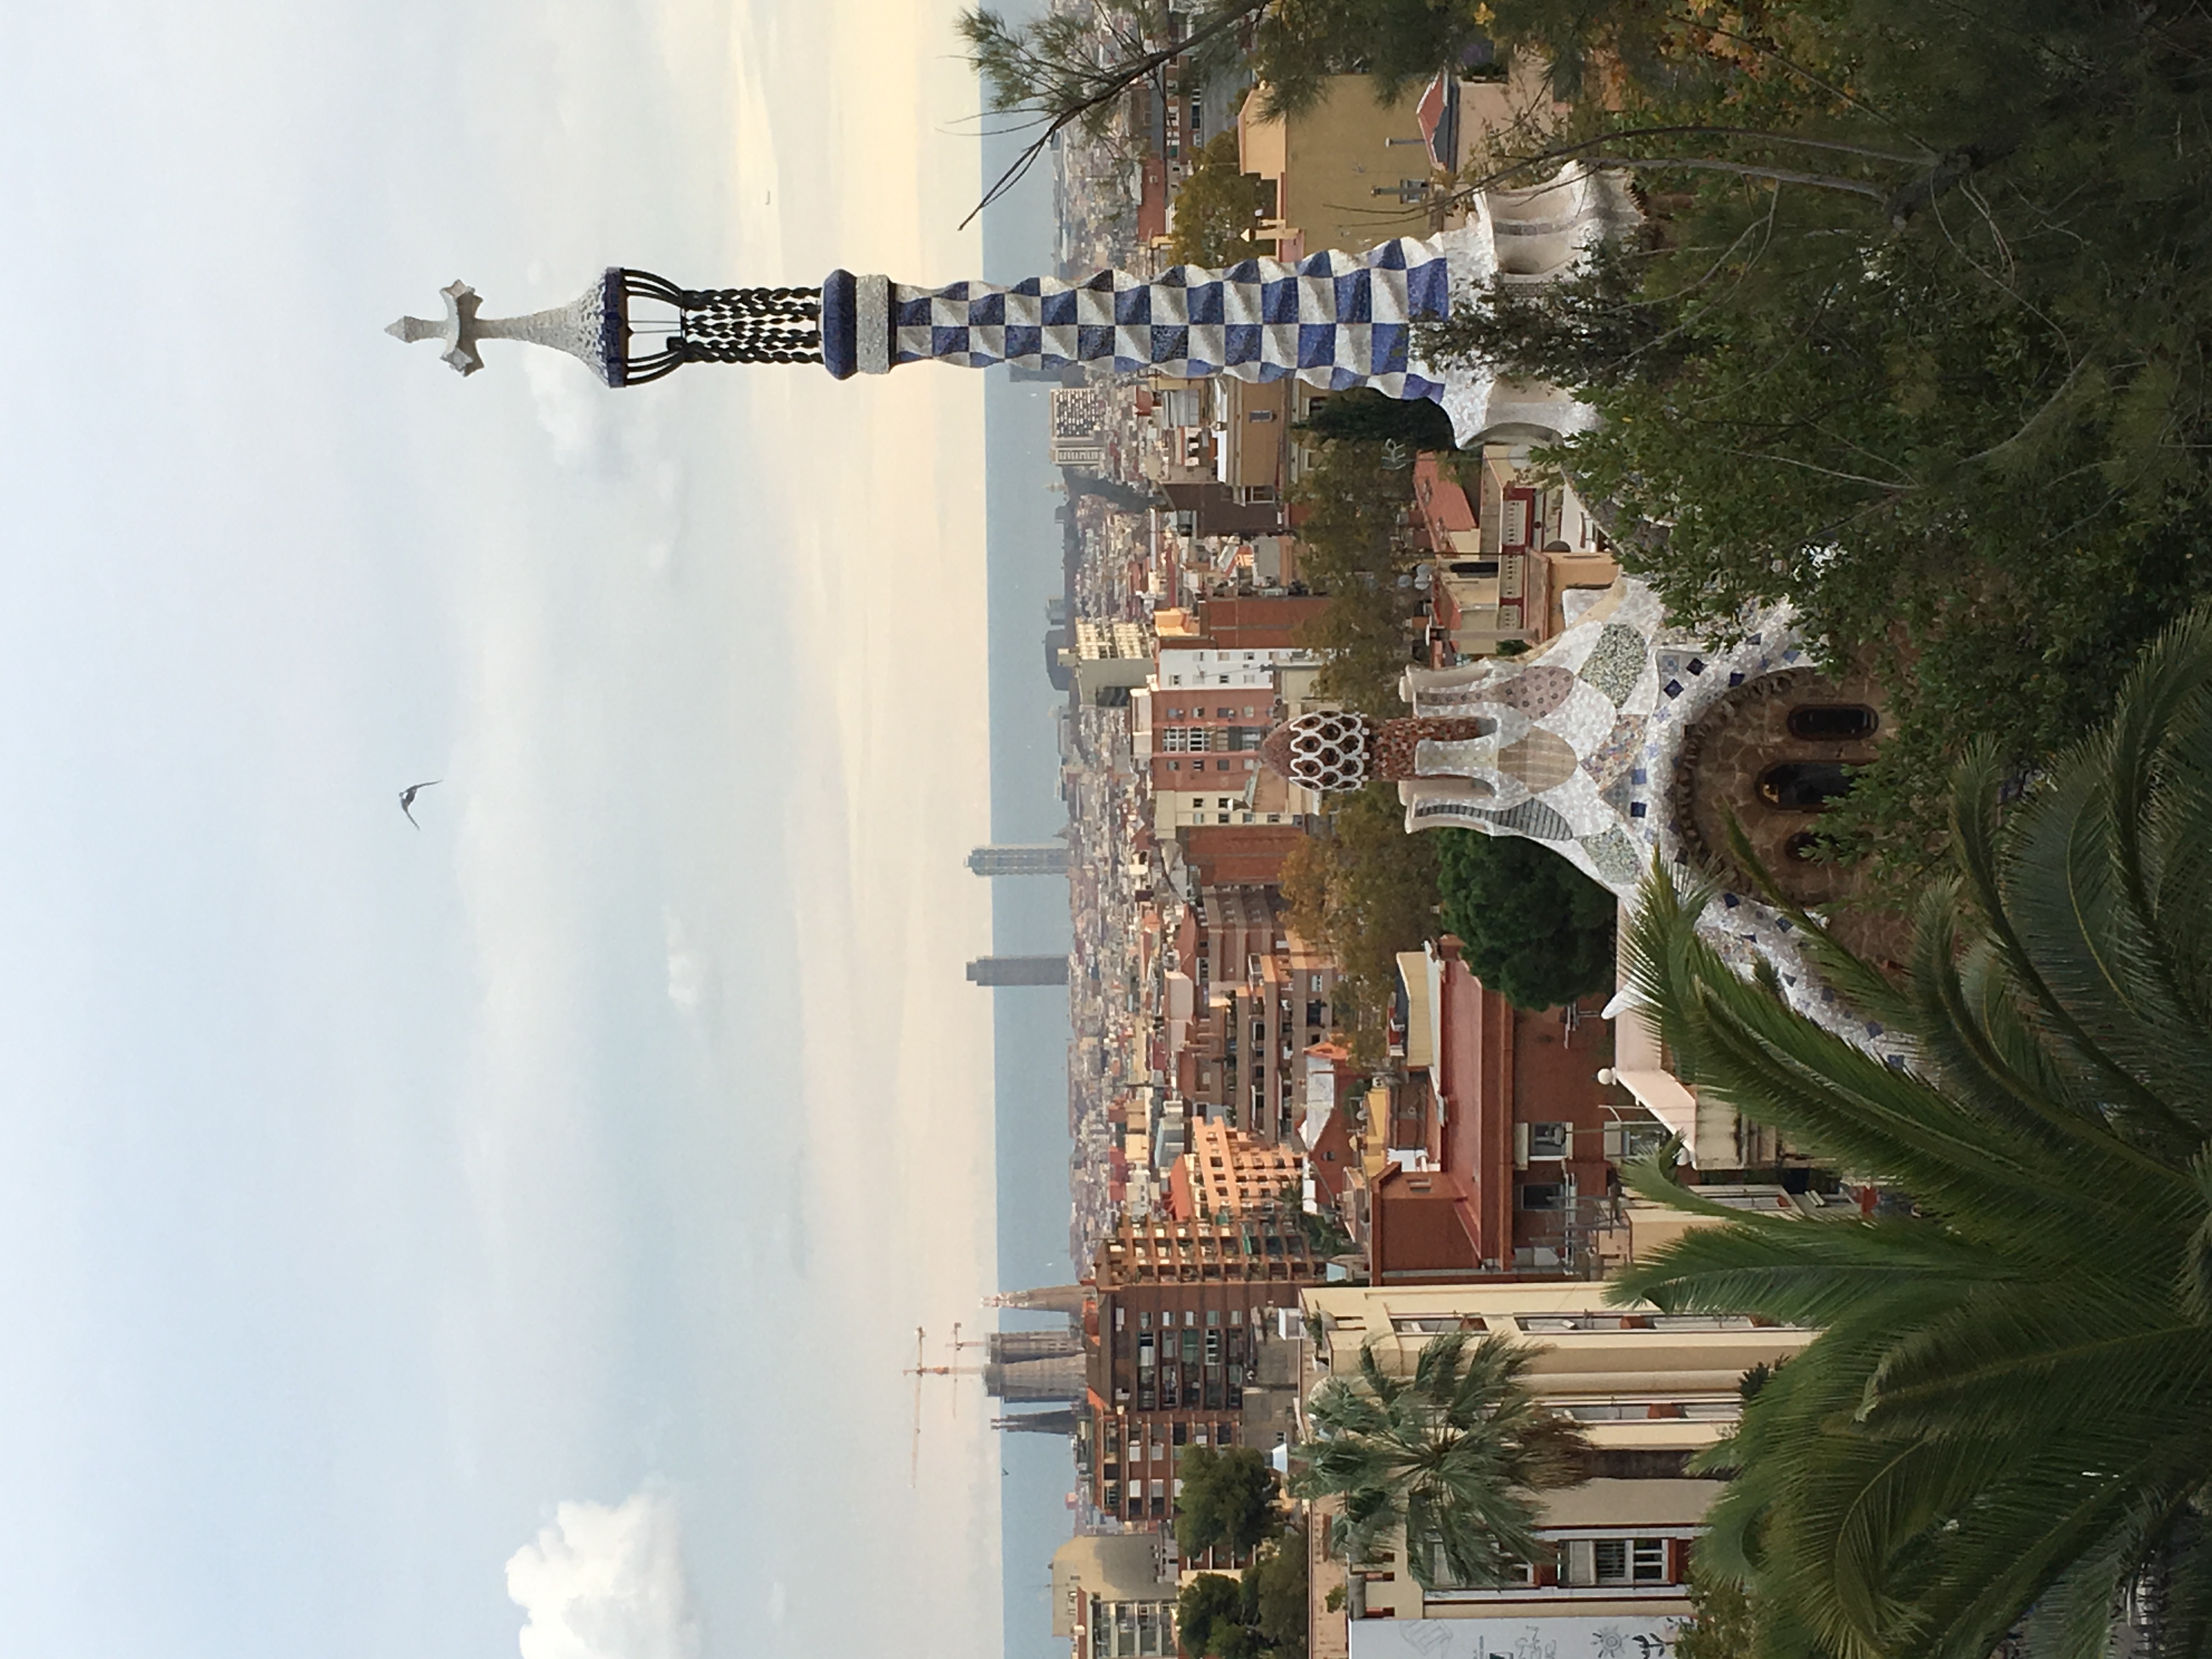 A view over the Barcelona skyline out to the sea